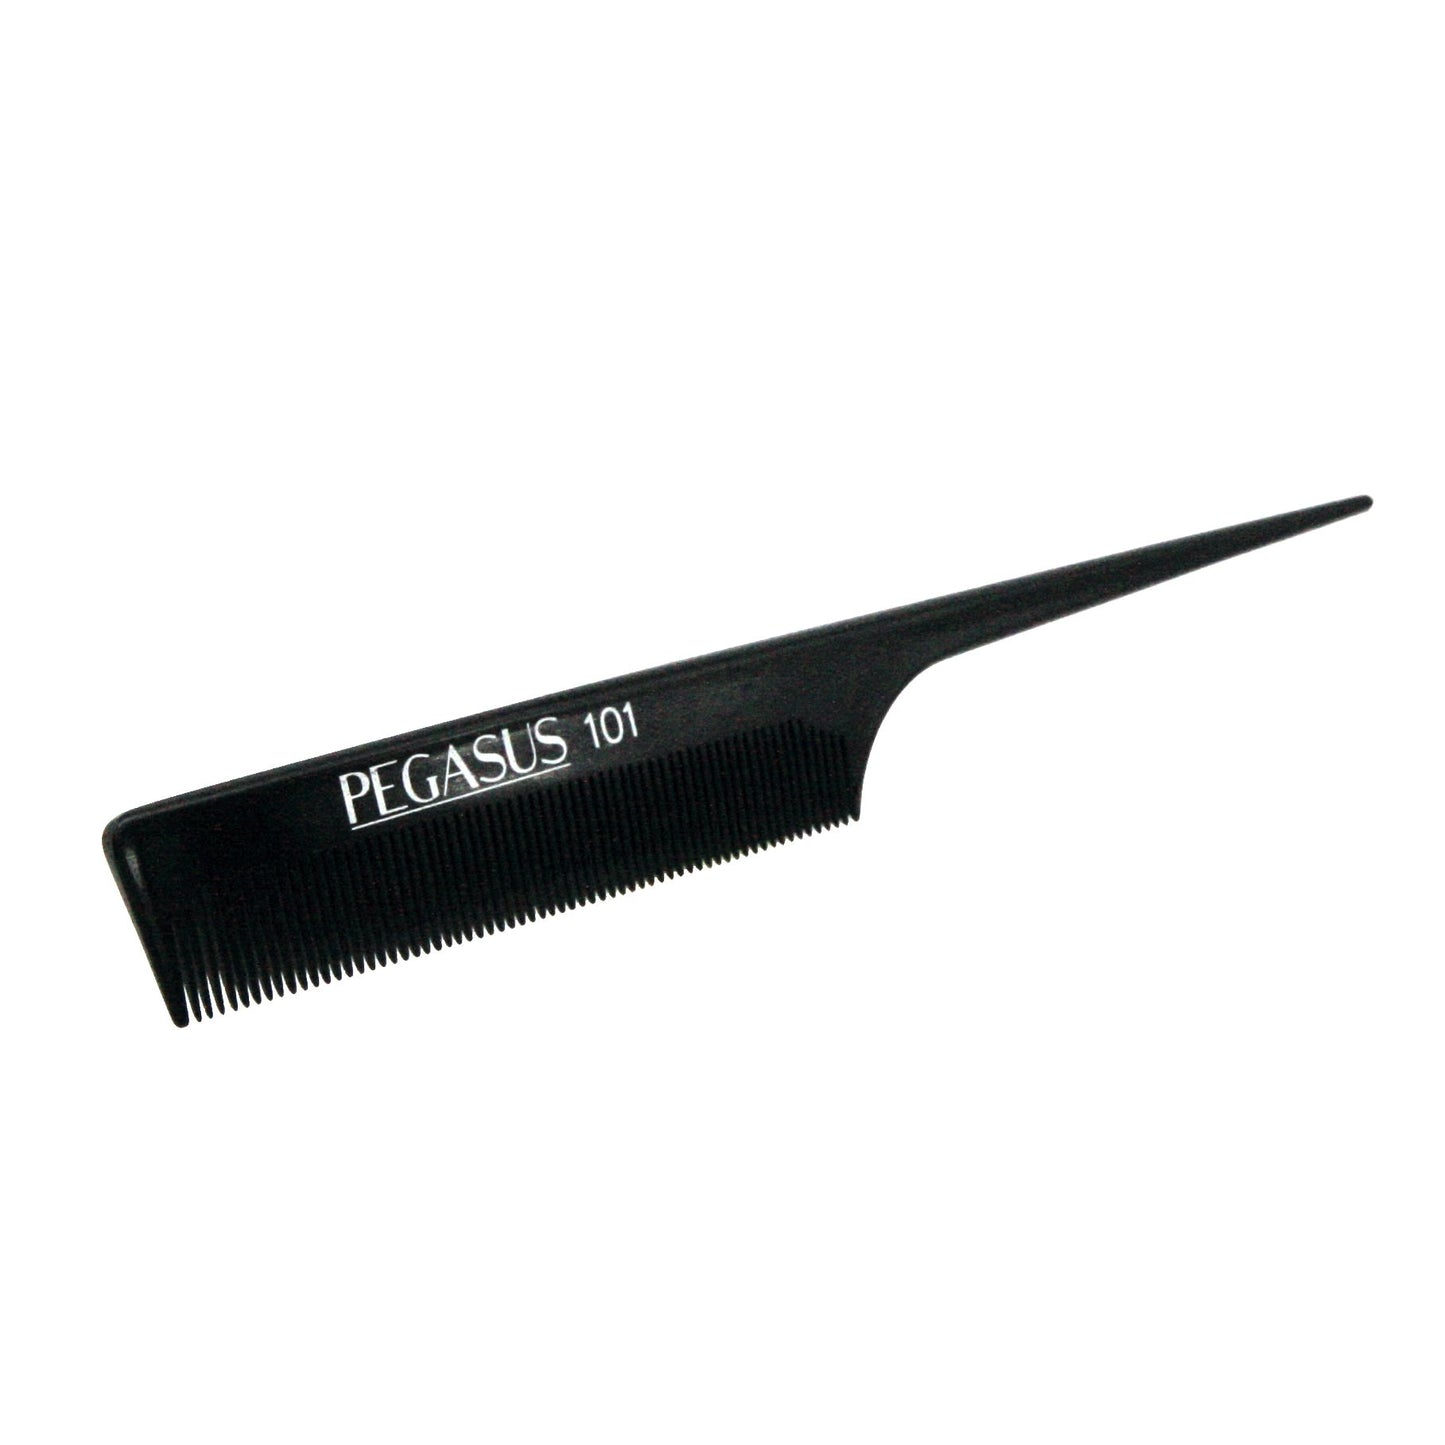 Pegasus 101, 8in Hard Rubber Fine Tooth Rat Tail Comb, Handmade, Seamless, Smooth Edges, Anti Static, Heat and Chemically Resistant, Great for Parting, Coloring Hair | Peines de goma dura - Black